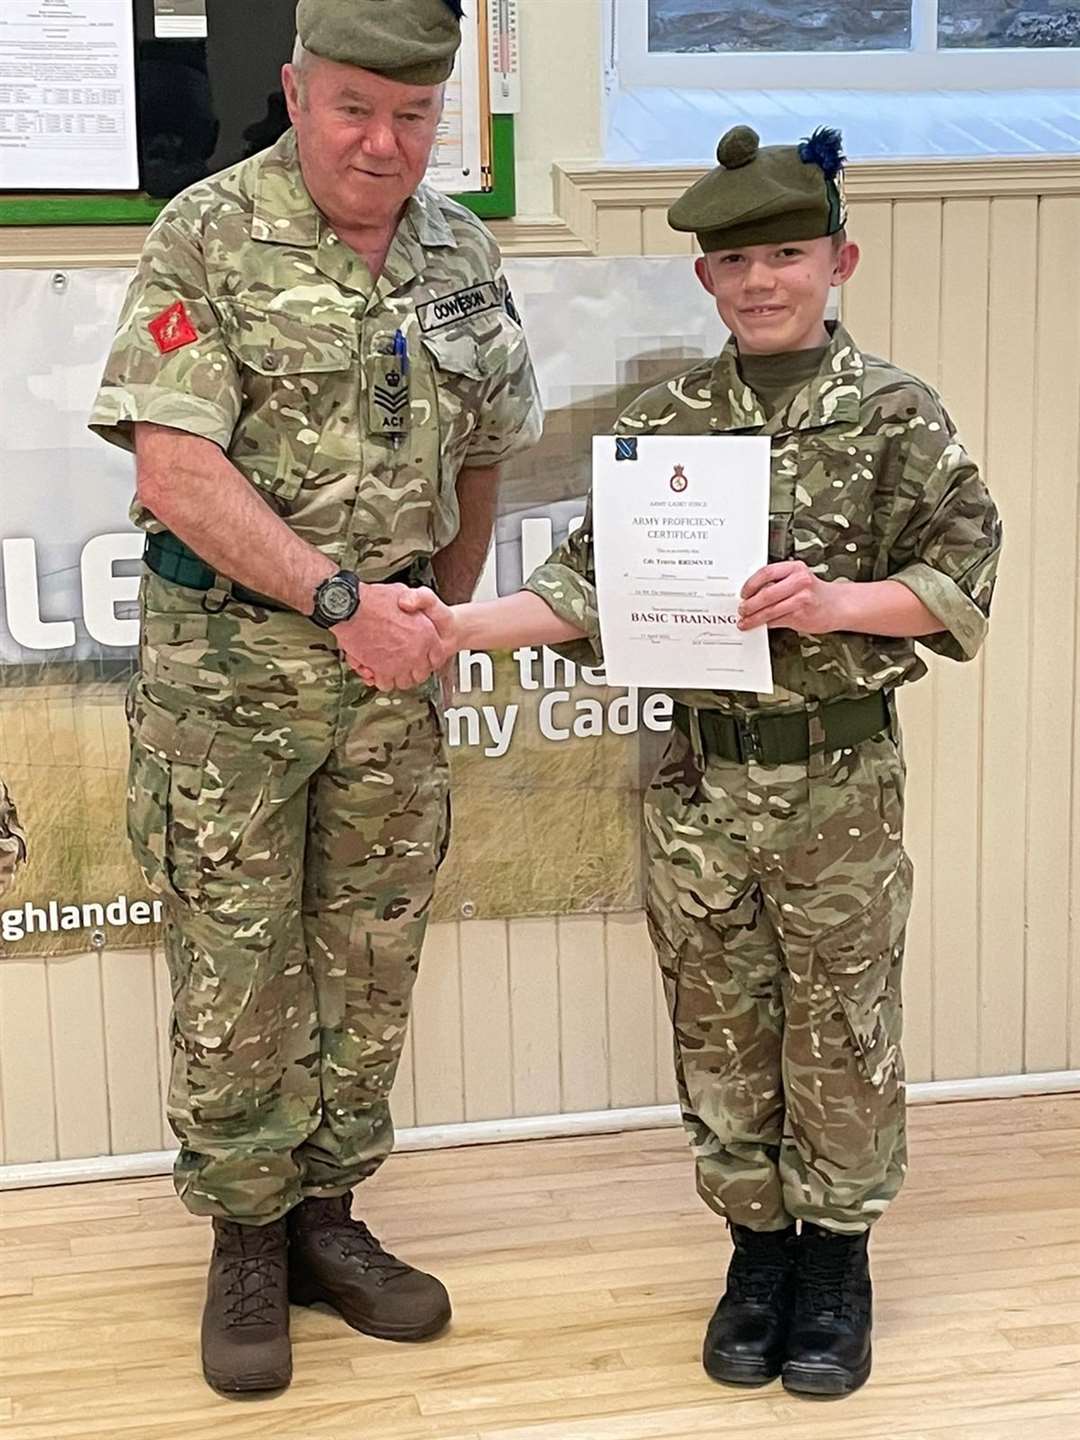 Cdt Travis Bremner receiving his Basic certificate and badge from SSI Cowieson.